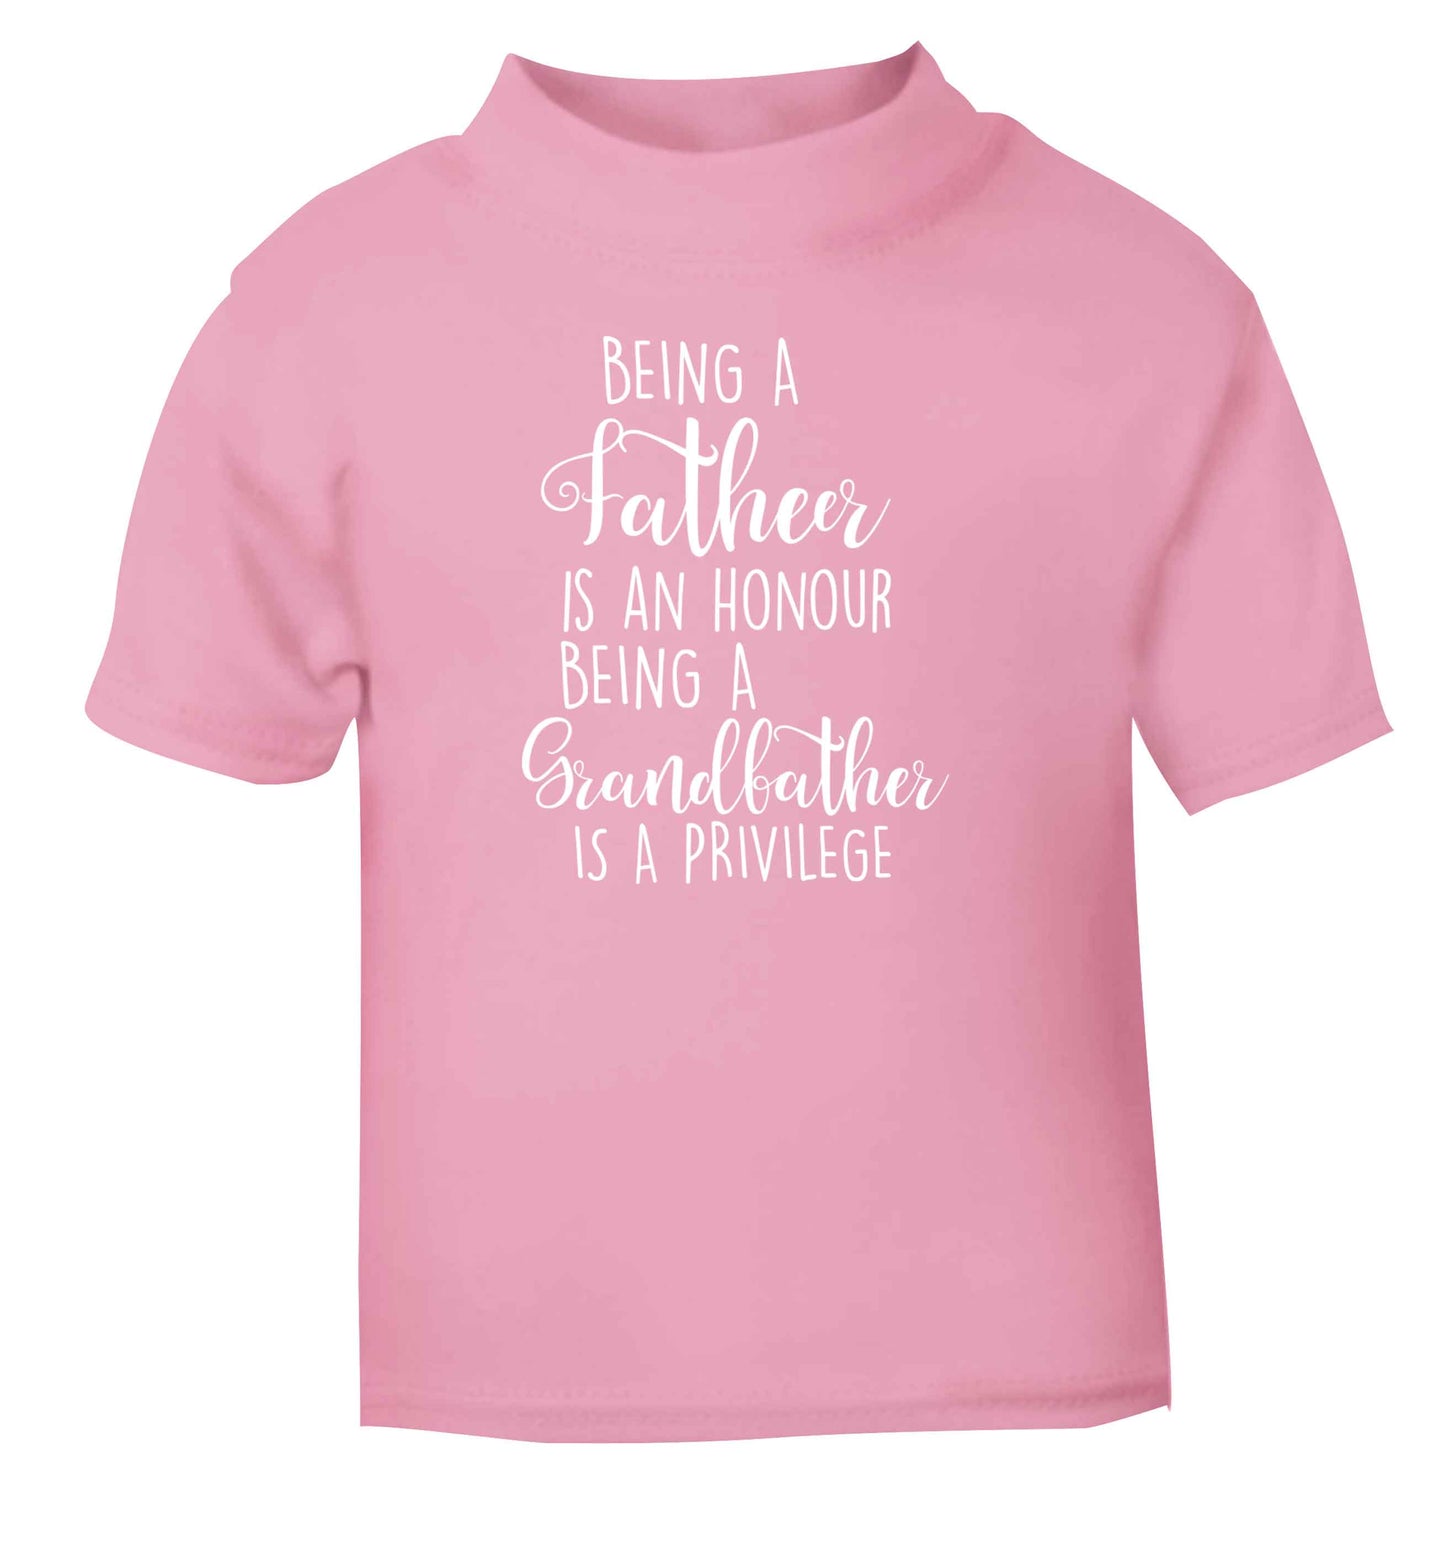 Being a father is an honour being a grandfather is a privilege light pink Baby Toddler Tshirt 2 Years